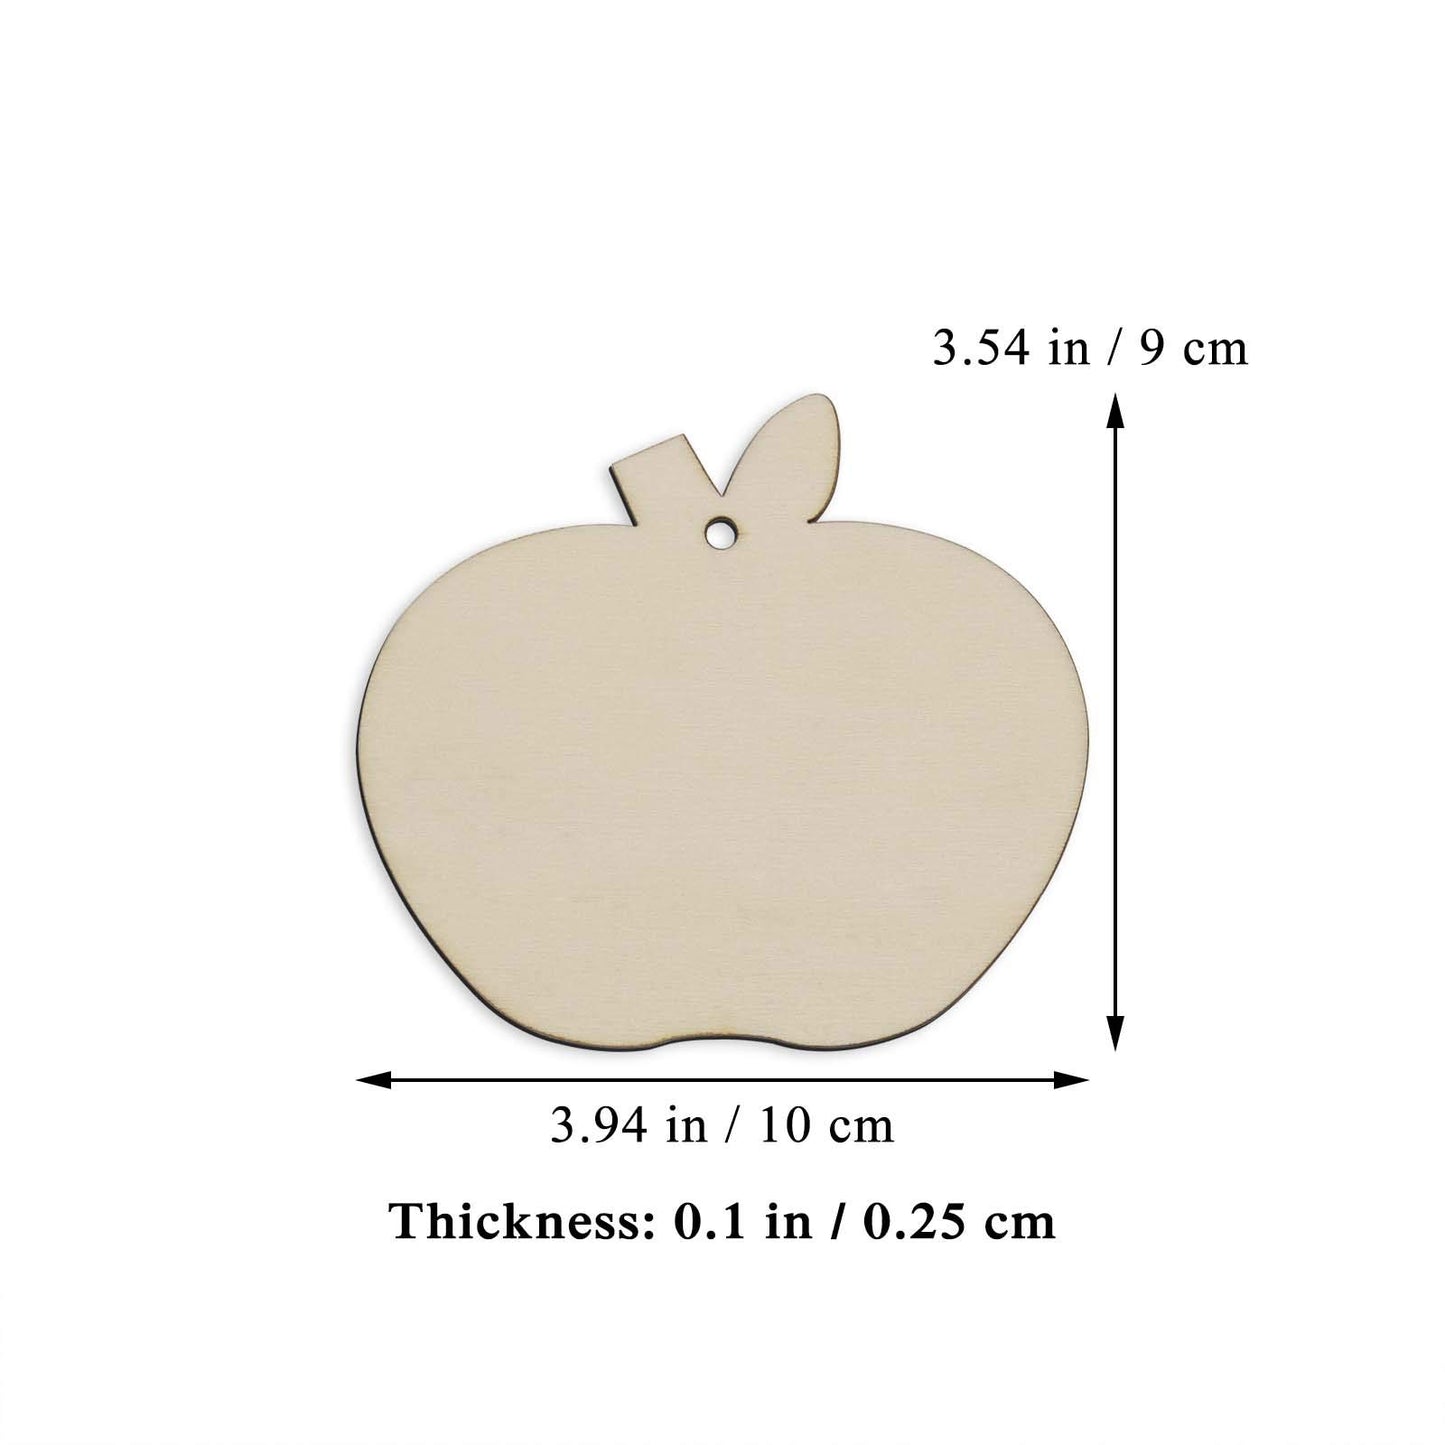 JANOU 20pcs Apple Shape Unfinished Wood Cutouts DIY Crafts Blank Hanging Gift Tags Ornaments with Ropes for Wedding Birthday Christmas Party